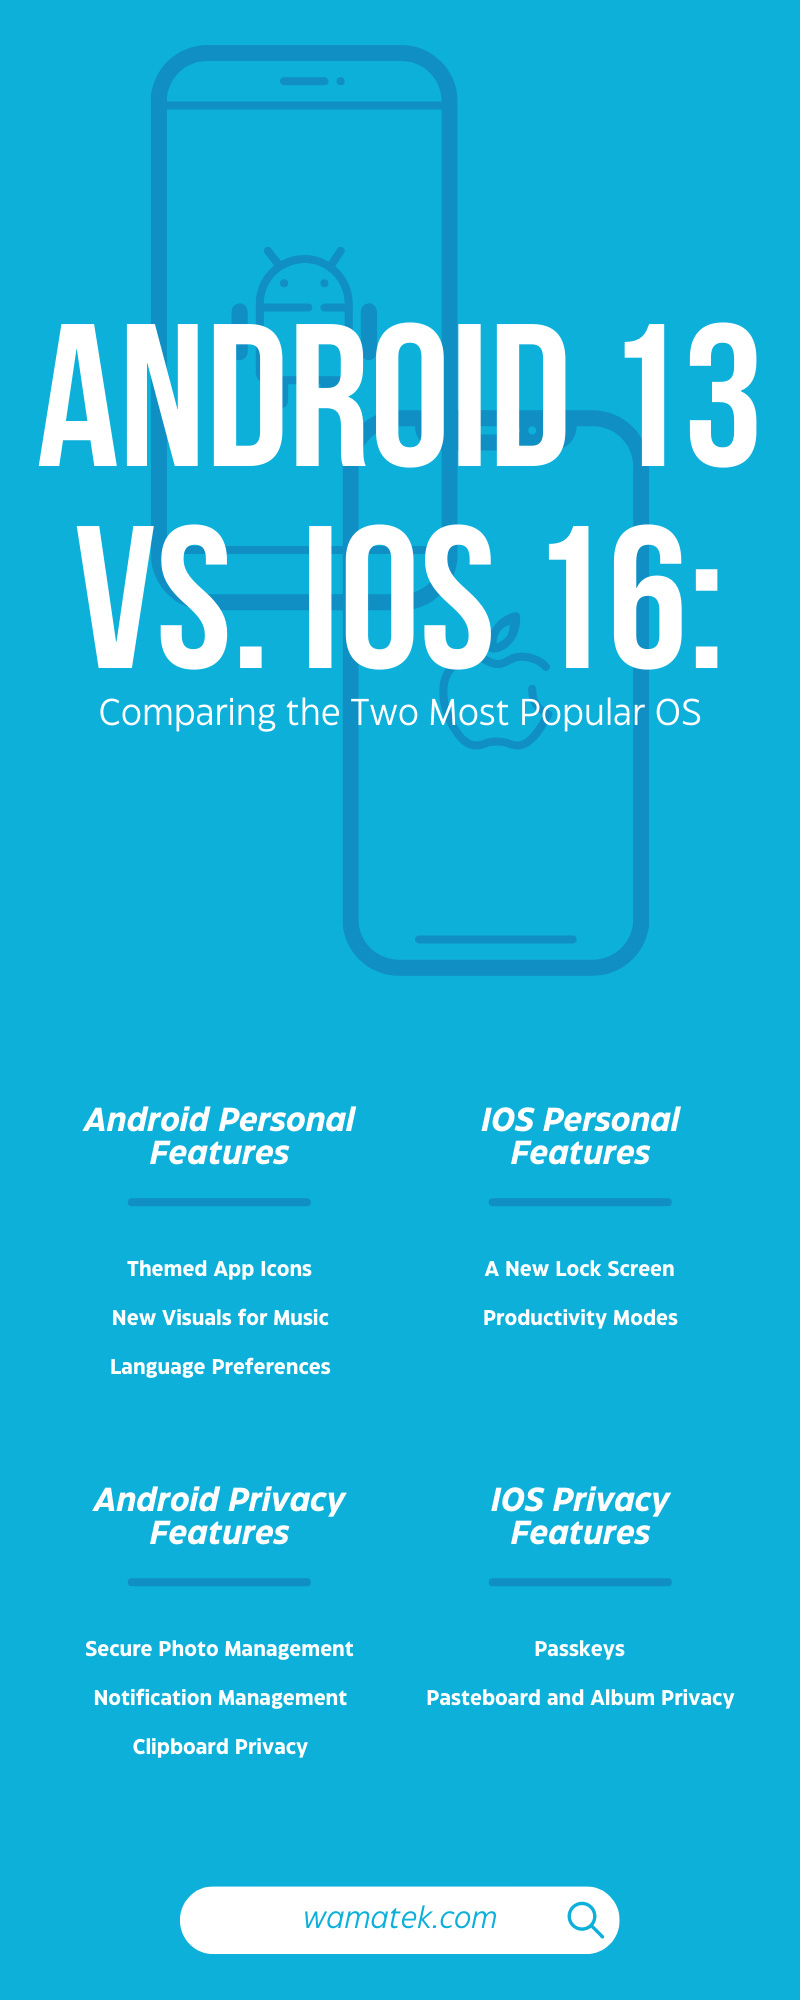 Android 13 vs. iOS 16: Comparing the Two Most Popular OS